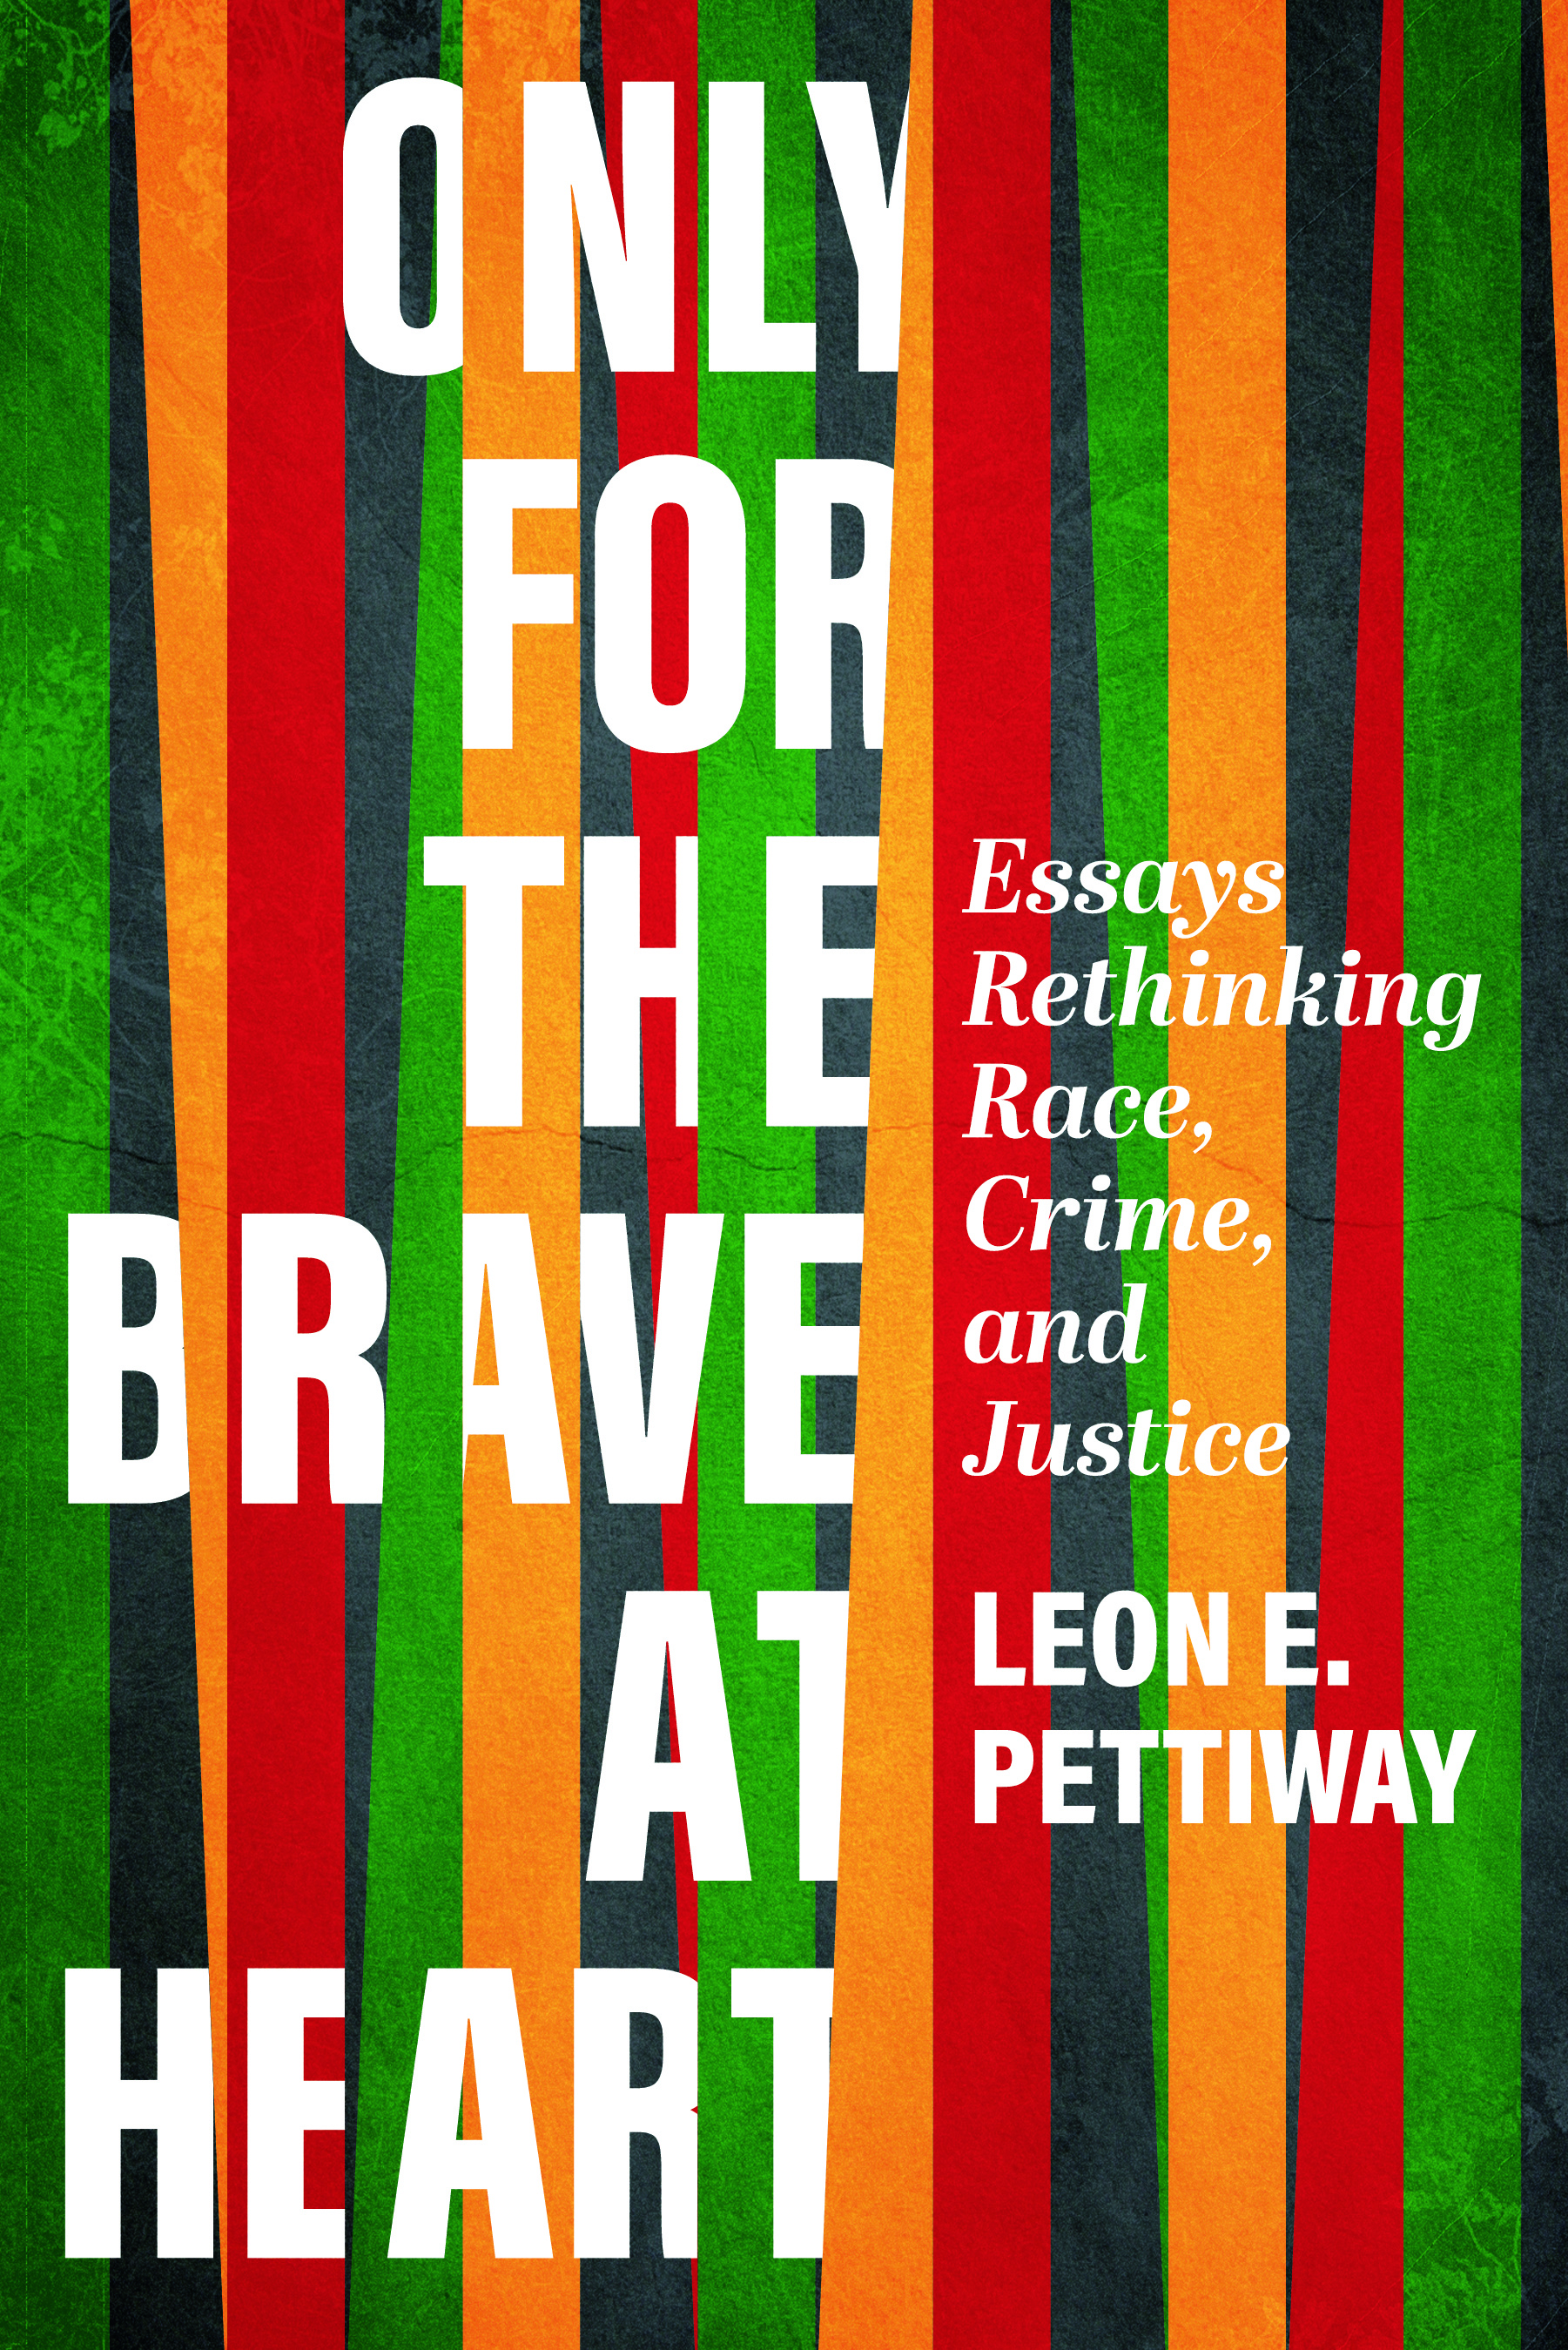 Book Cover Images image of Only for the Brave at Heart: Essays Rethinking Race, Crime, and Justice